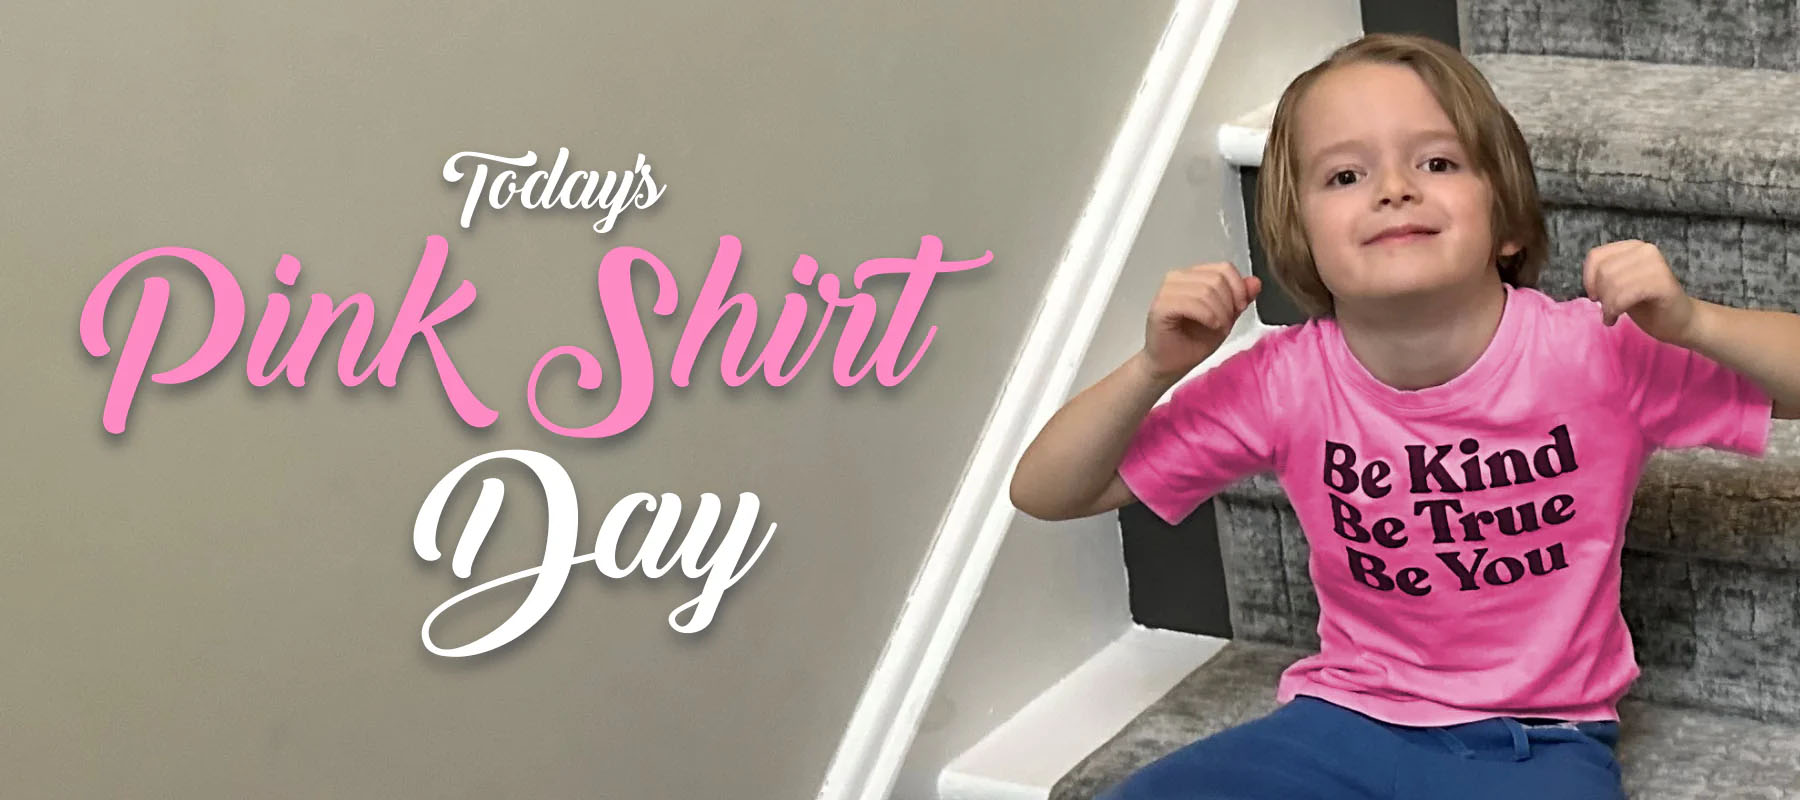 Picture of boy with pink shirt for Pink Shirt Day